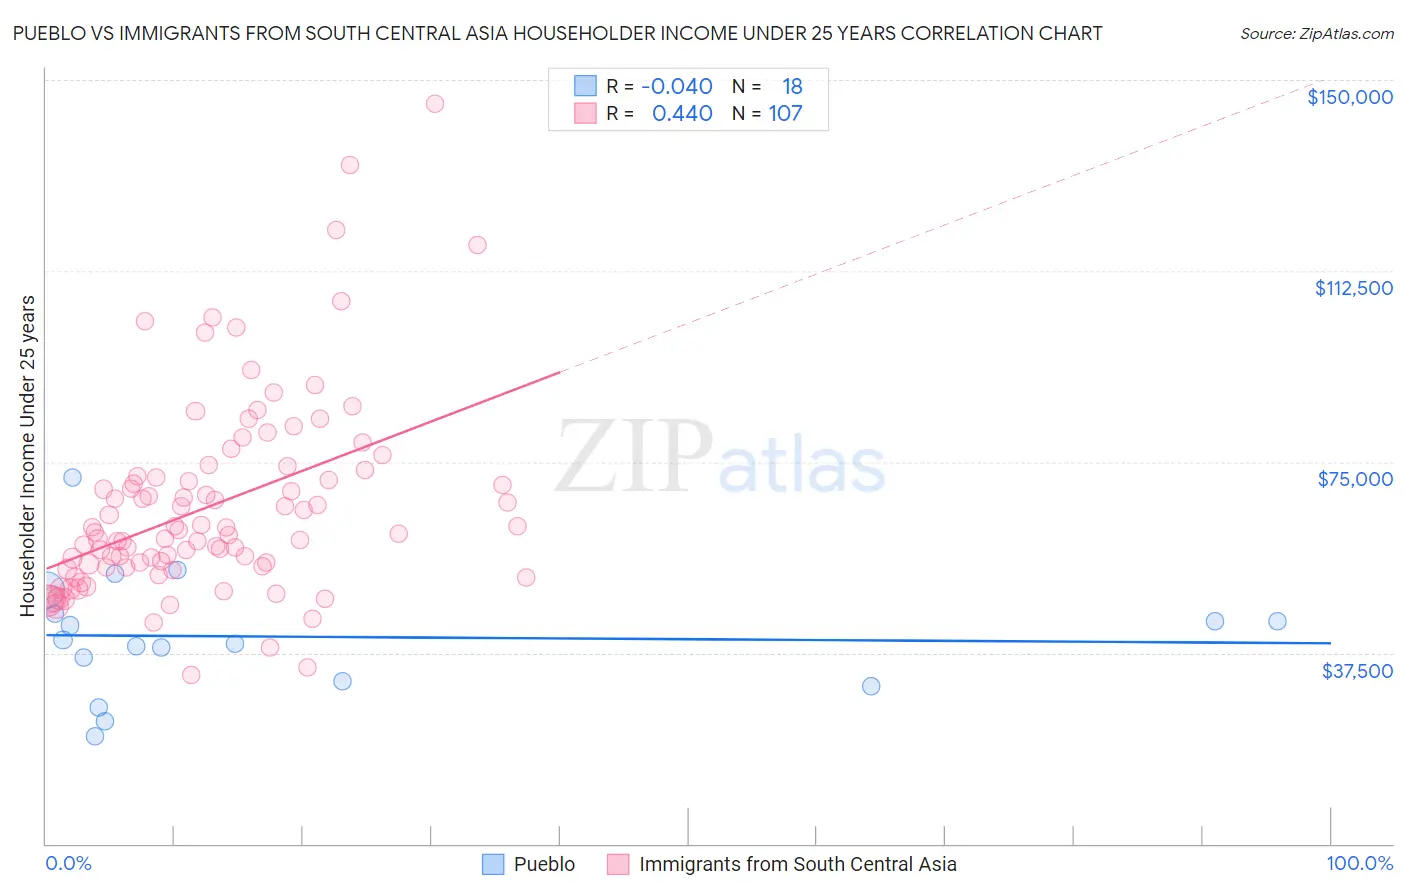 Pueblo vs Immigrants from South Central Asia Householder Income Under 25 years